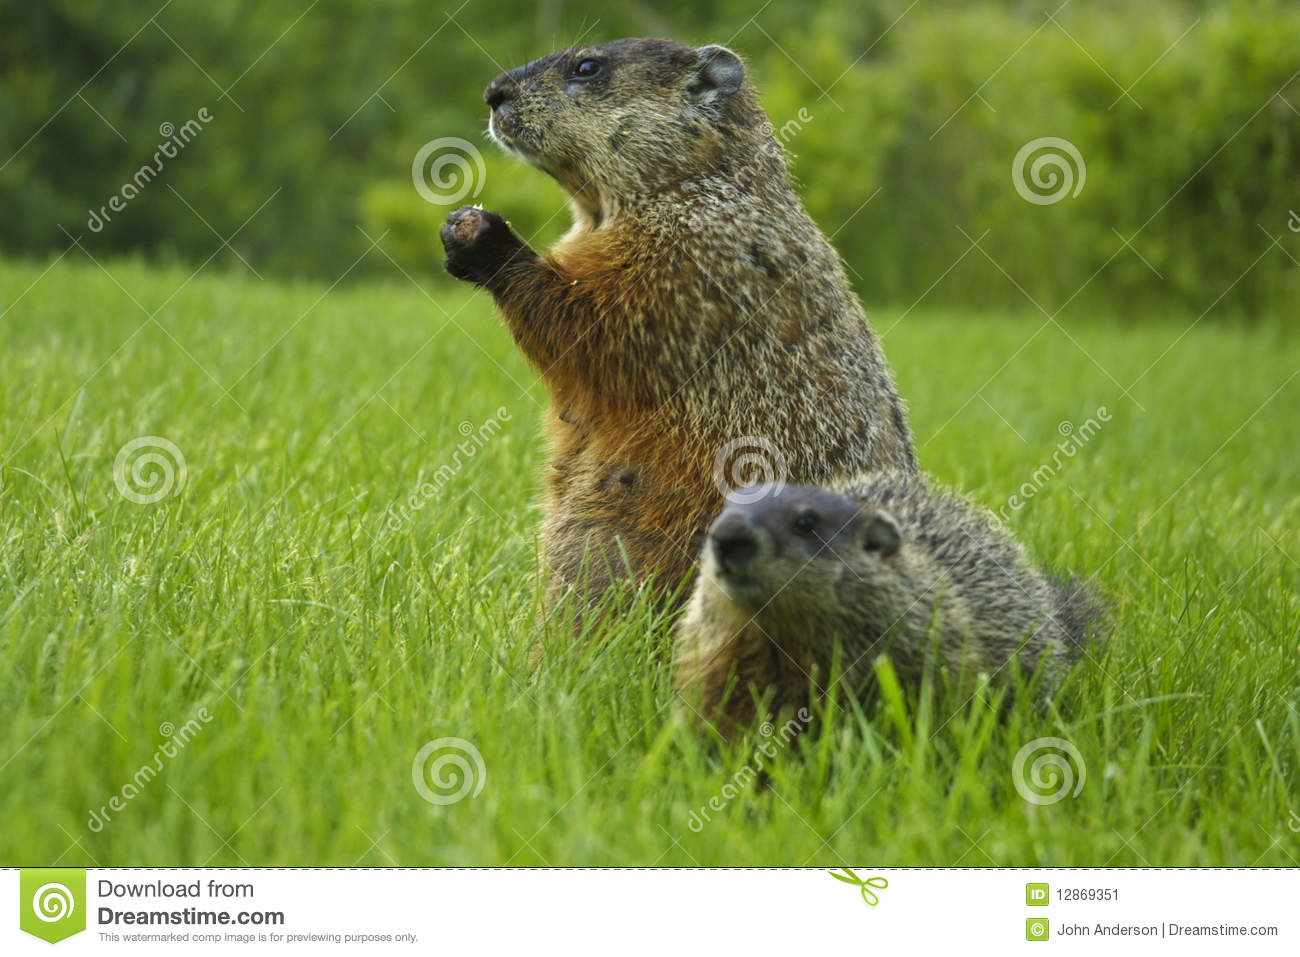 Groundhog In Grass In Maine Near Gold Course With Young